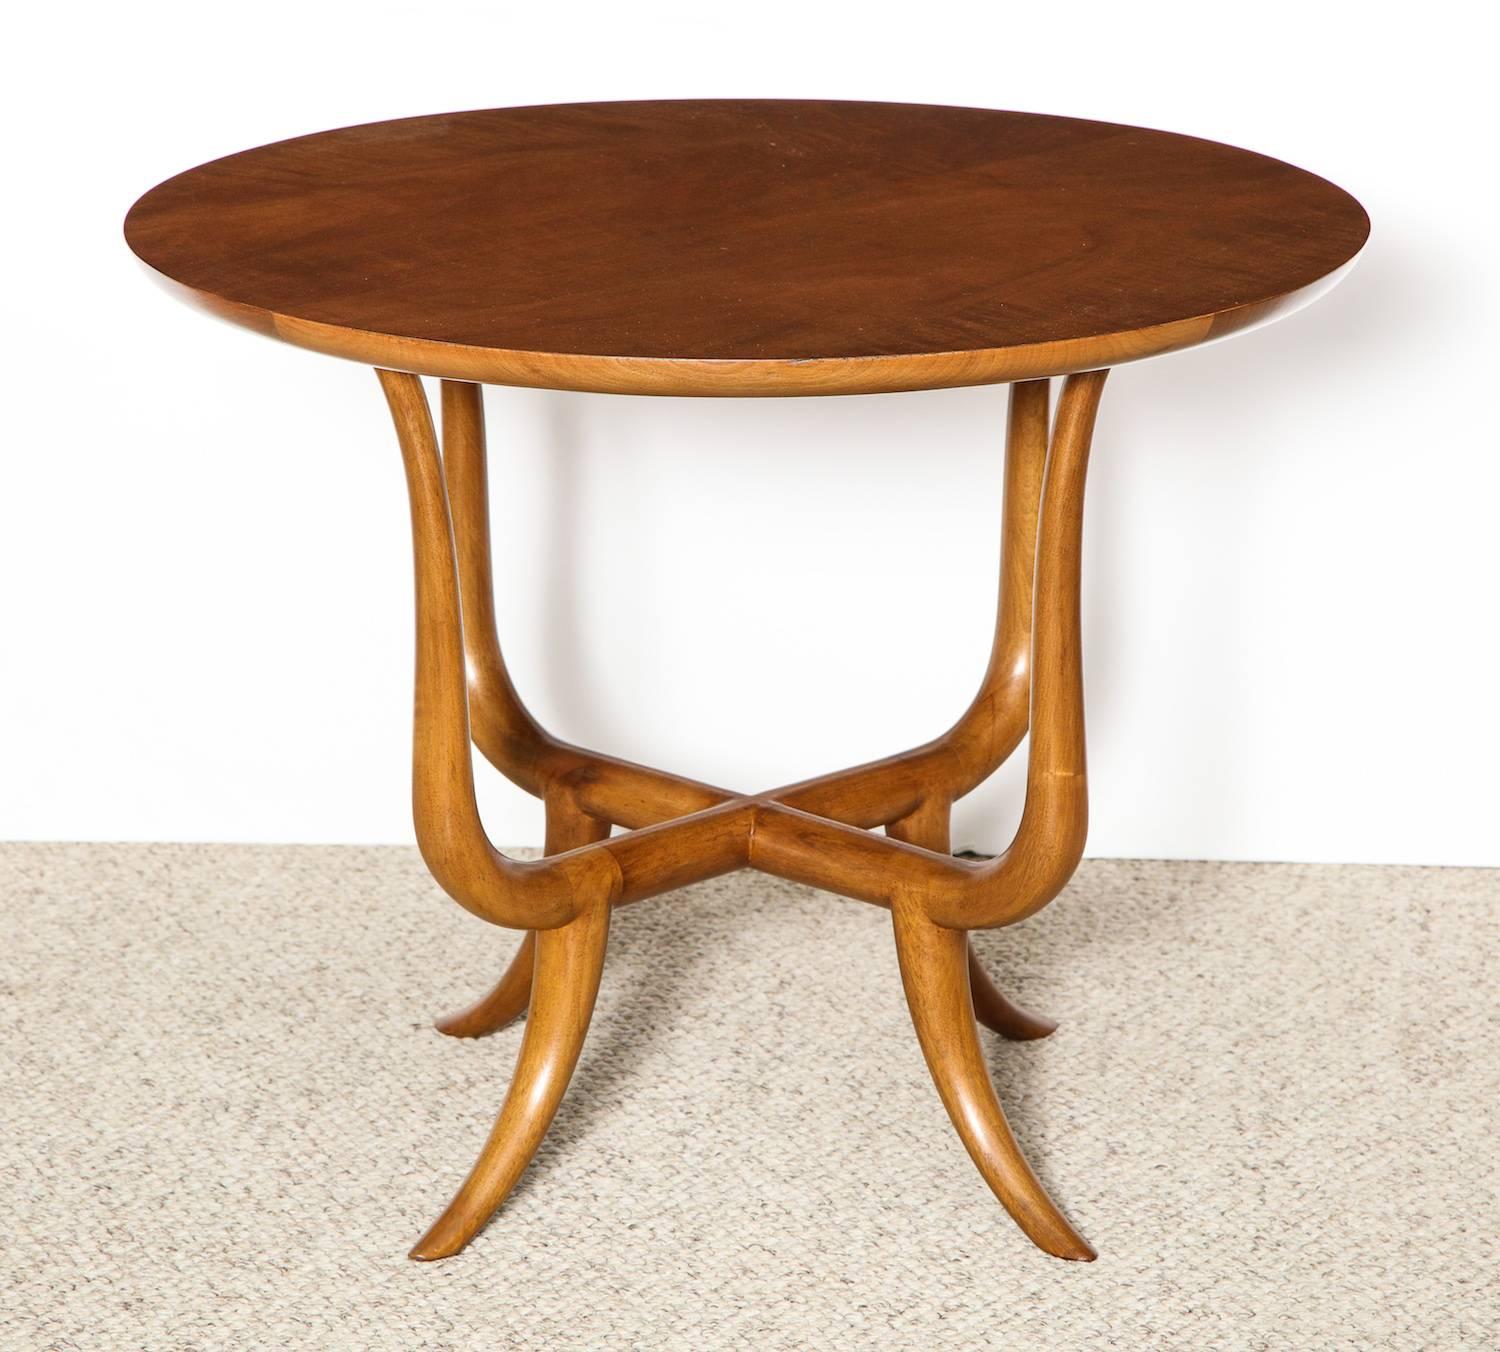 Circular walnut top floating on a solid-walnut dowel structure with four tapering legs. A strong example of Gibbings' custom work in the mid-1950s incorporating a bit of eastern influence. Provenance: Thomas B. Davis Residence - Rancho Mirage,